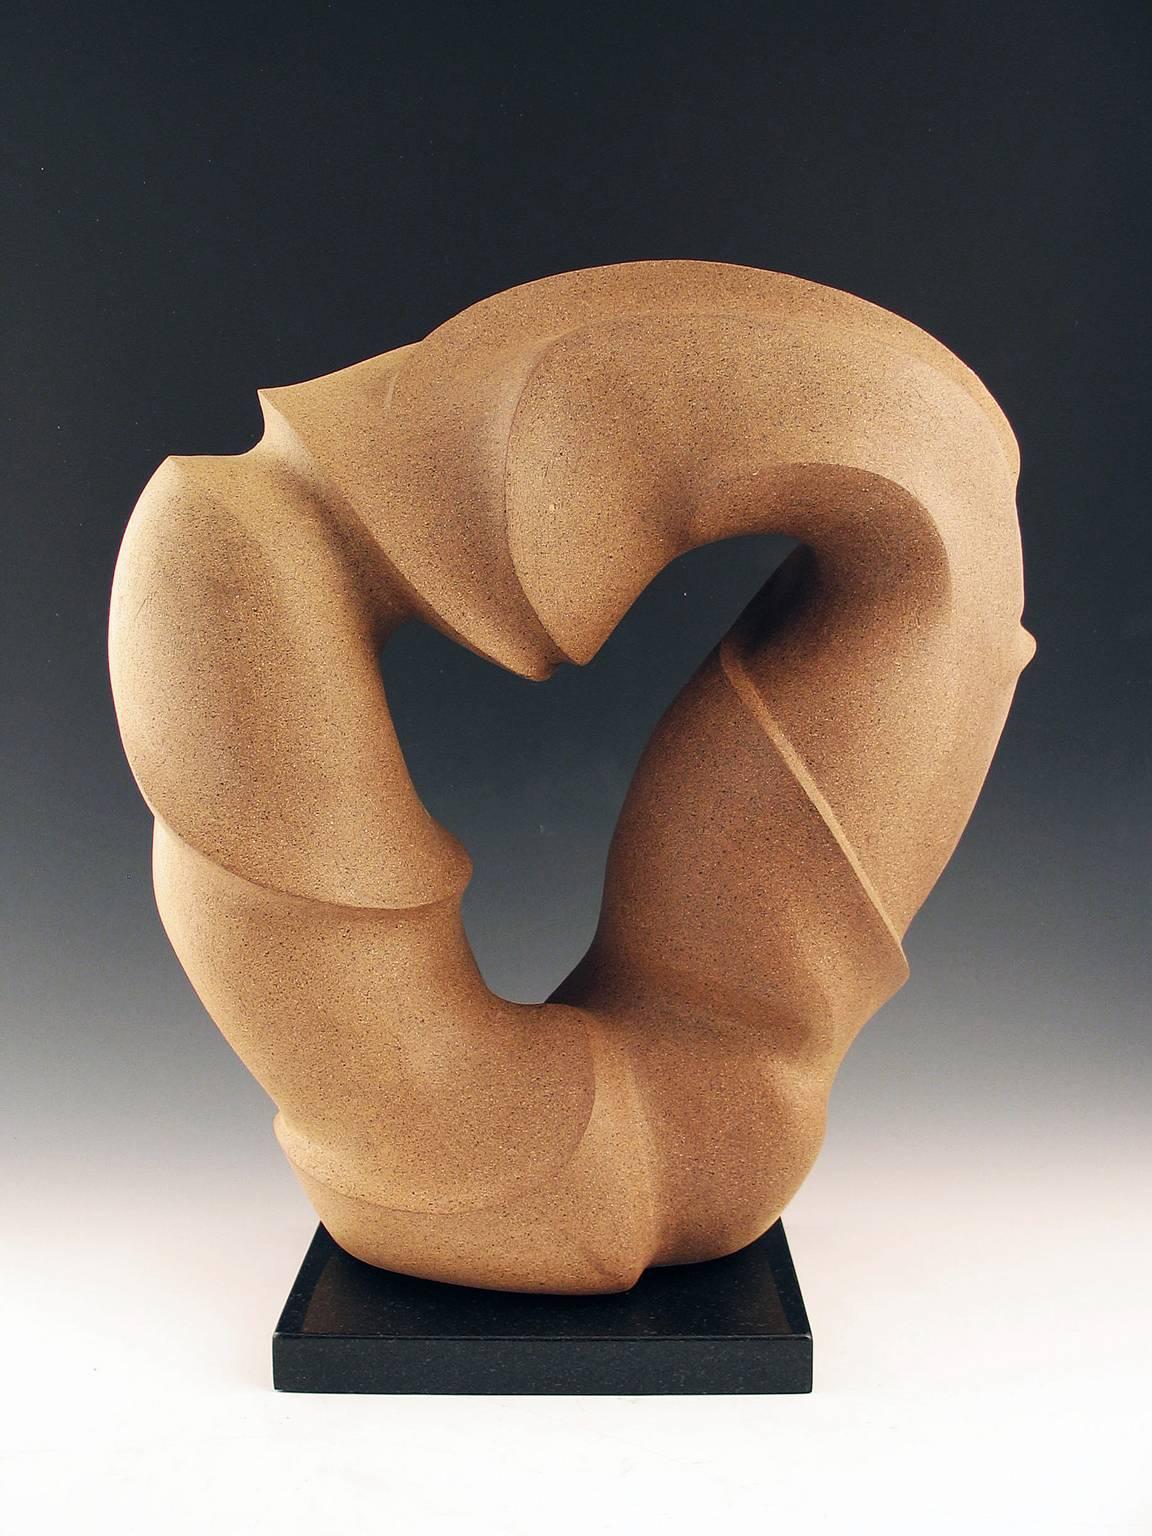  “Sandstone Passages”, speckled ceramic, inspired by sandstone and water - Sculpture by Elaine Lorenz